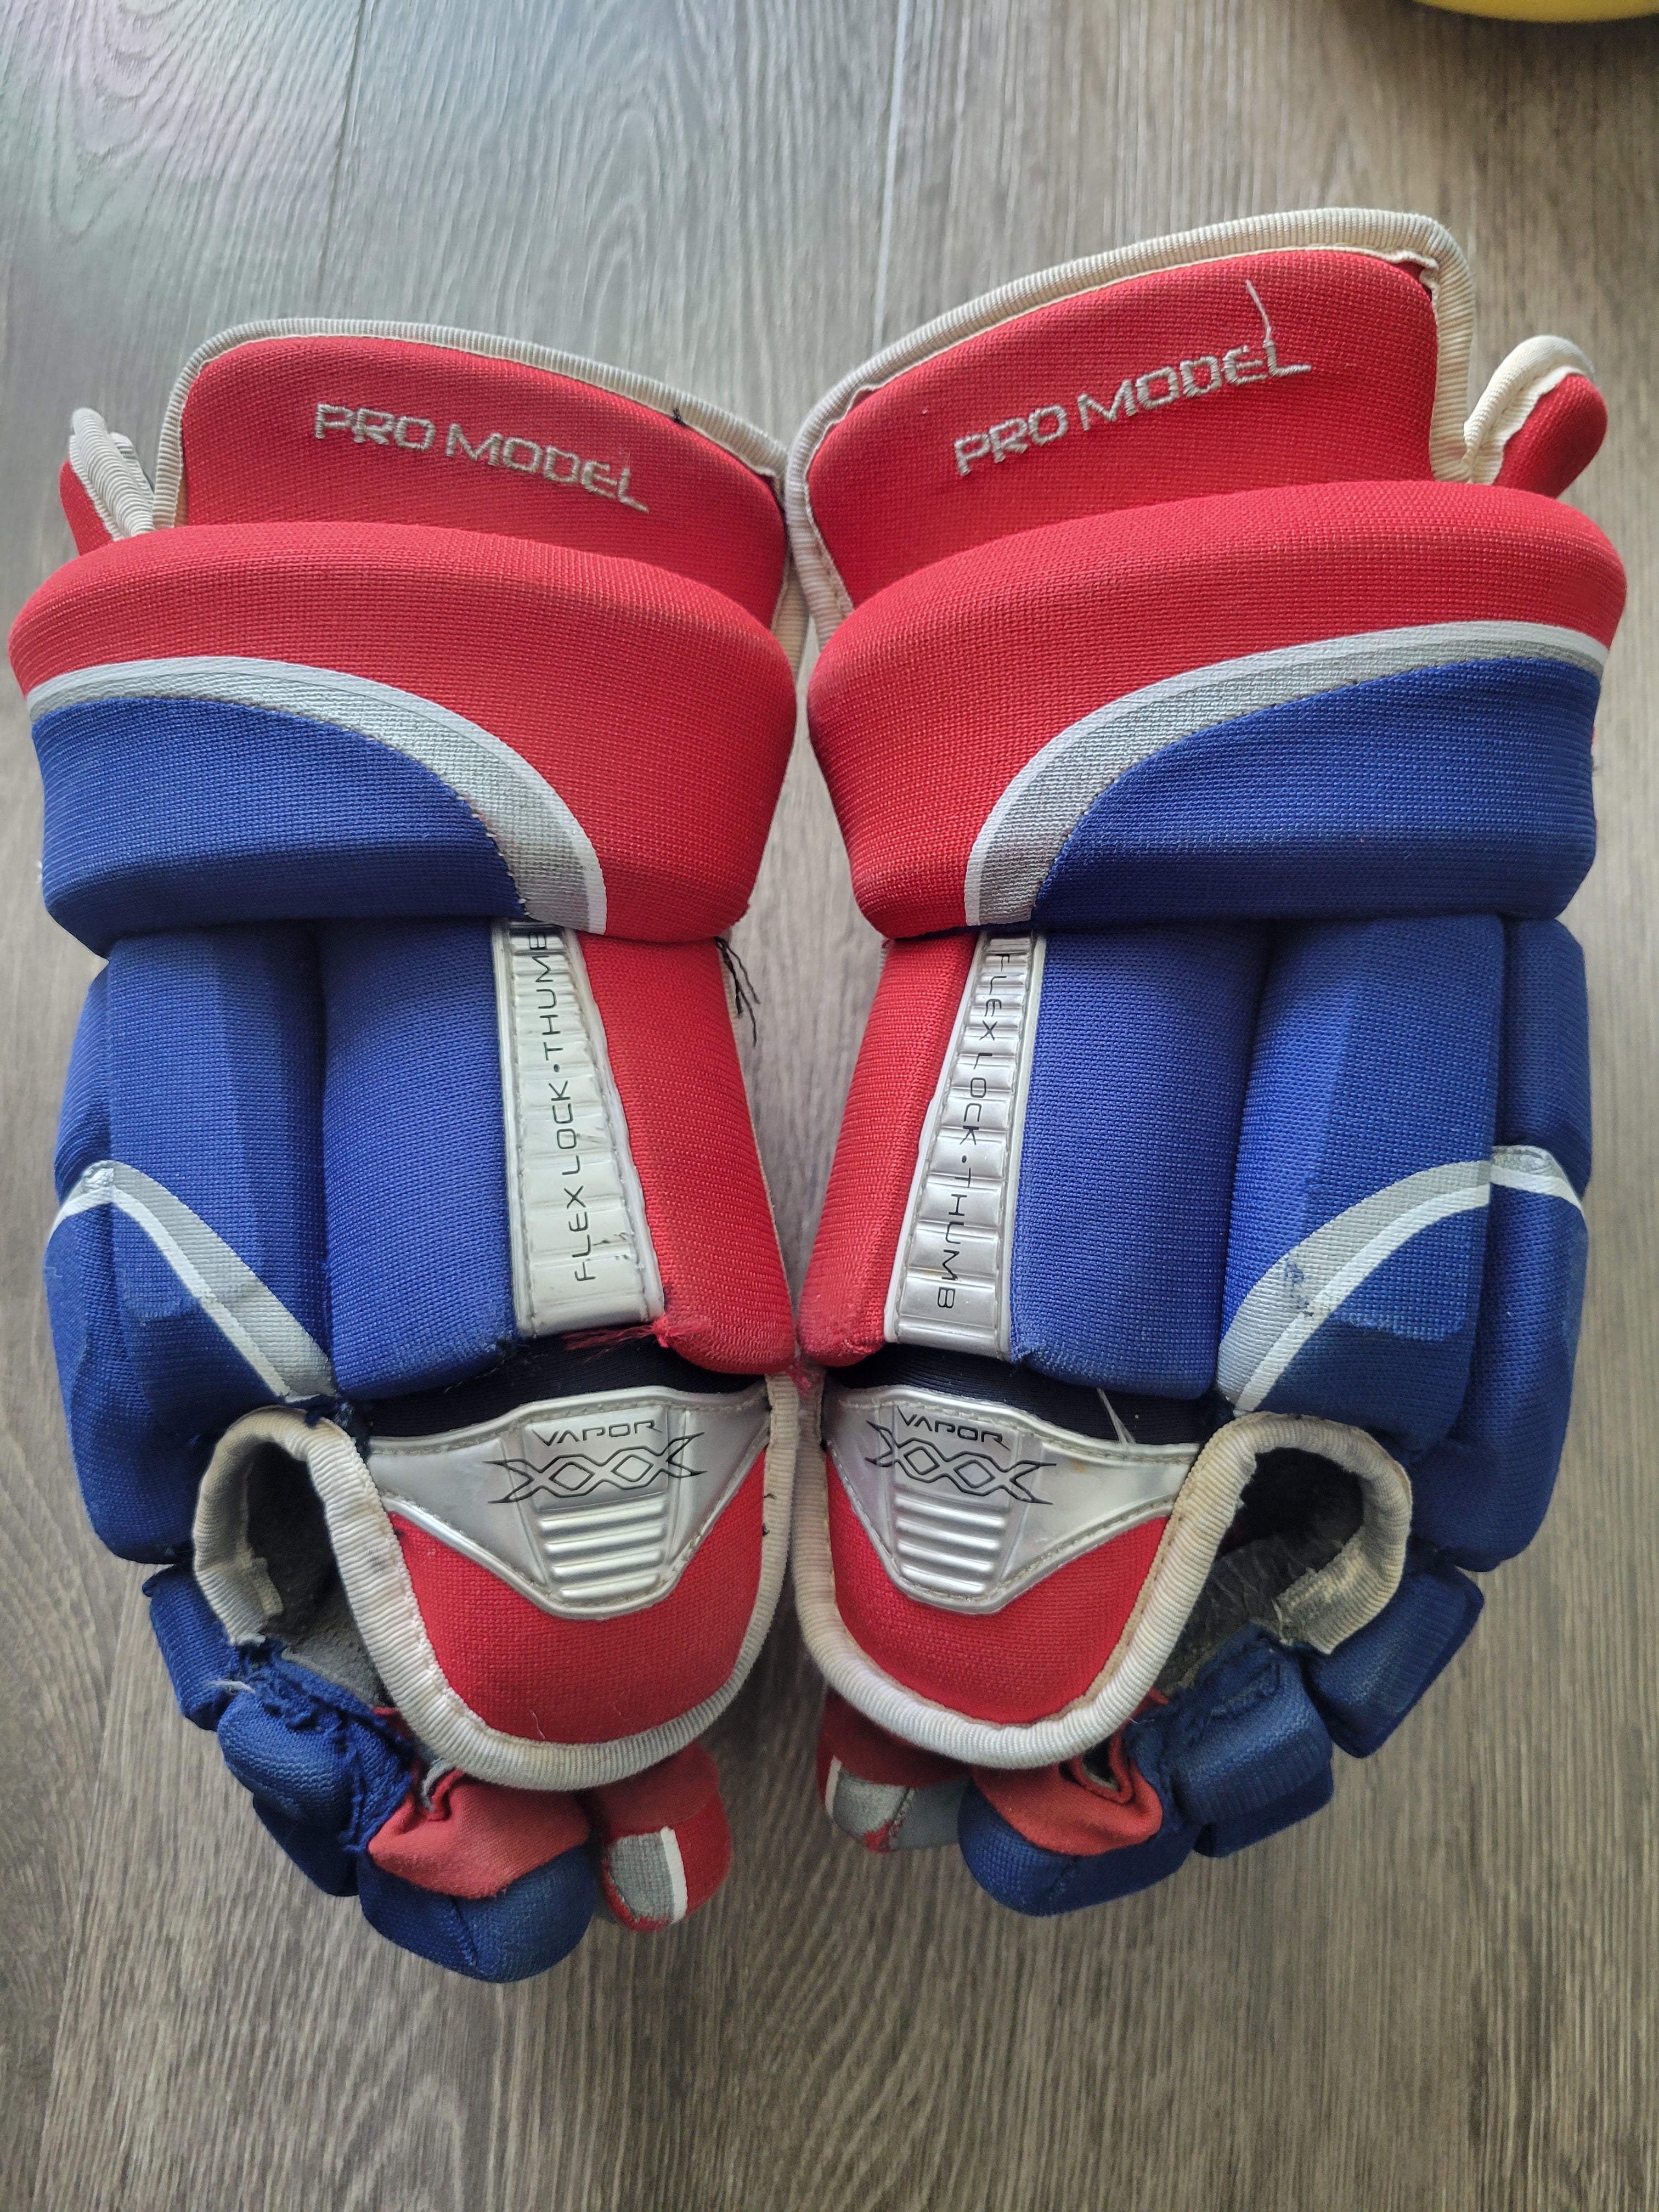 Sherwood T120 Roller Inline ICE Hockey Gloves~Blue/Red~Size 14 